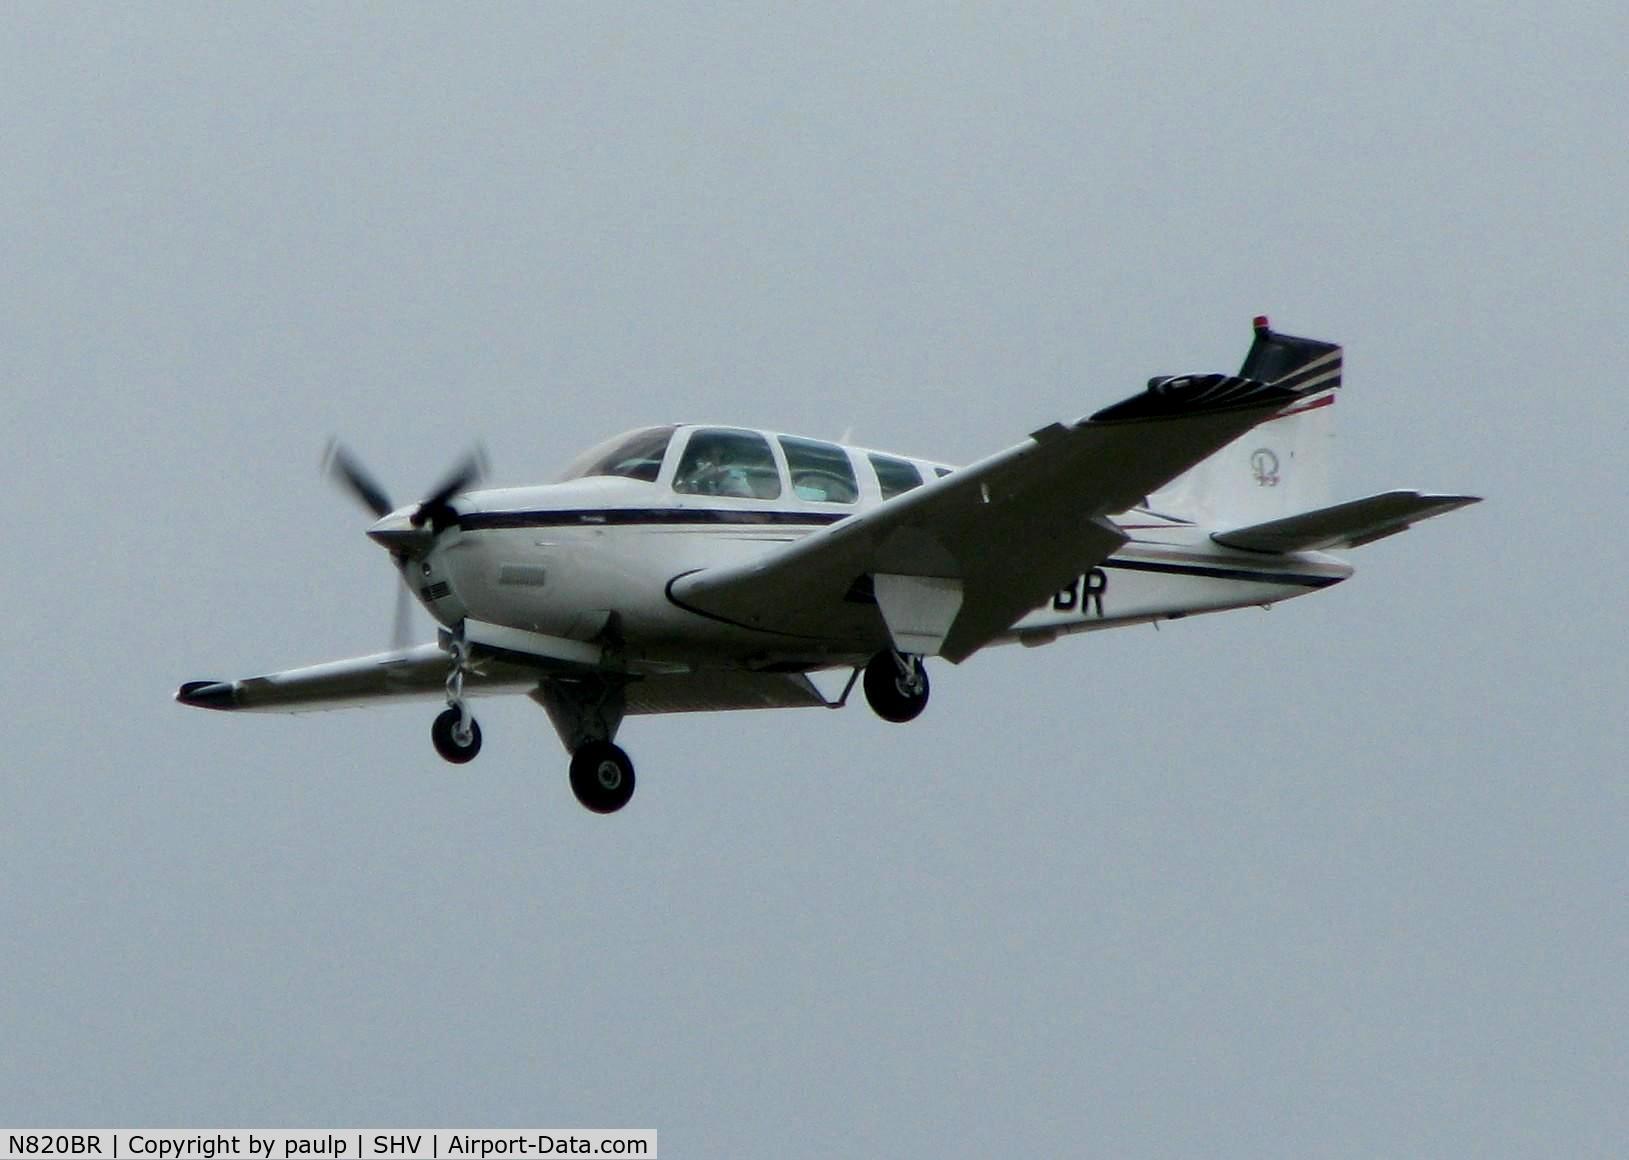 N820BR, 1996 Raytheon Aircraft Company A36 Bonanza C/N E-3011, Landing at Shreveport Regional. Some serious wind blowing today!